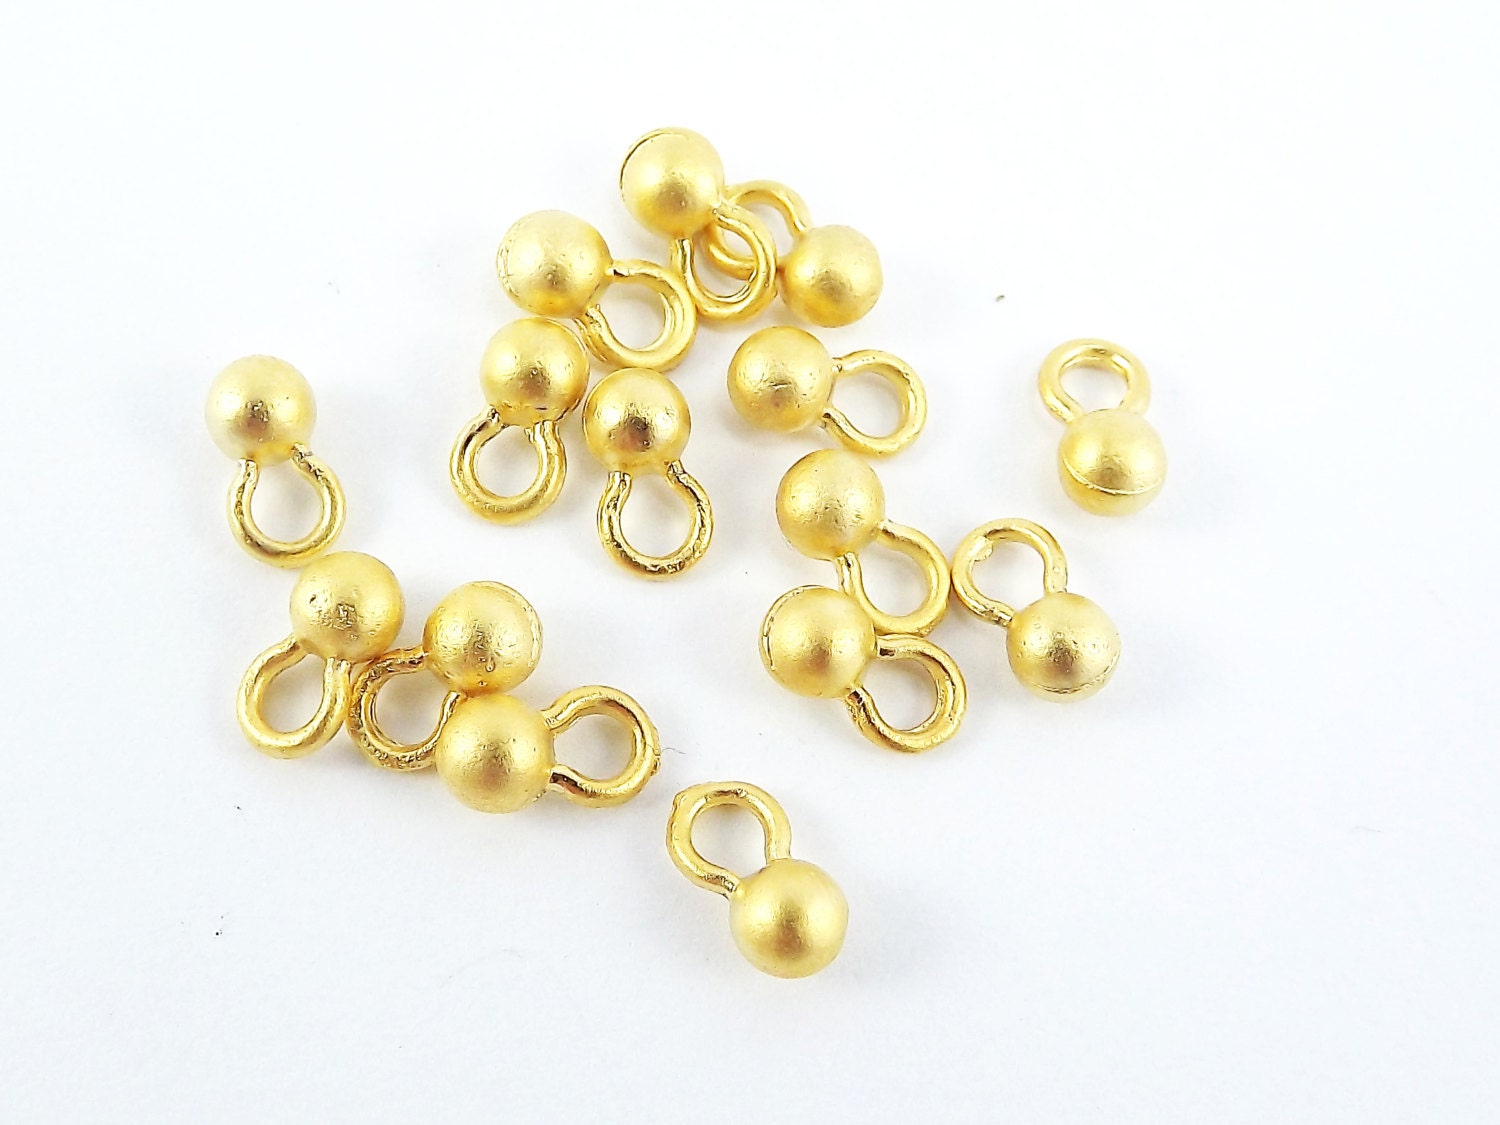 Round Ribbed Gold Ball Drop Charms, Drop Charms, Beading Charms, Textured Ball Charms, Bracelet Charms, Matte Antique Silver Plated 20pcs